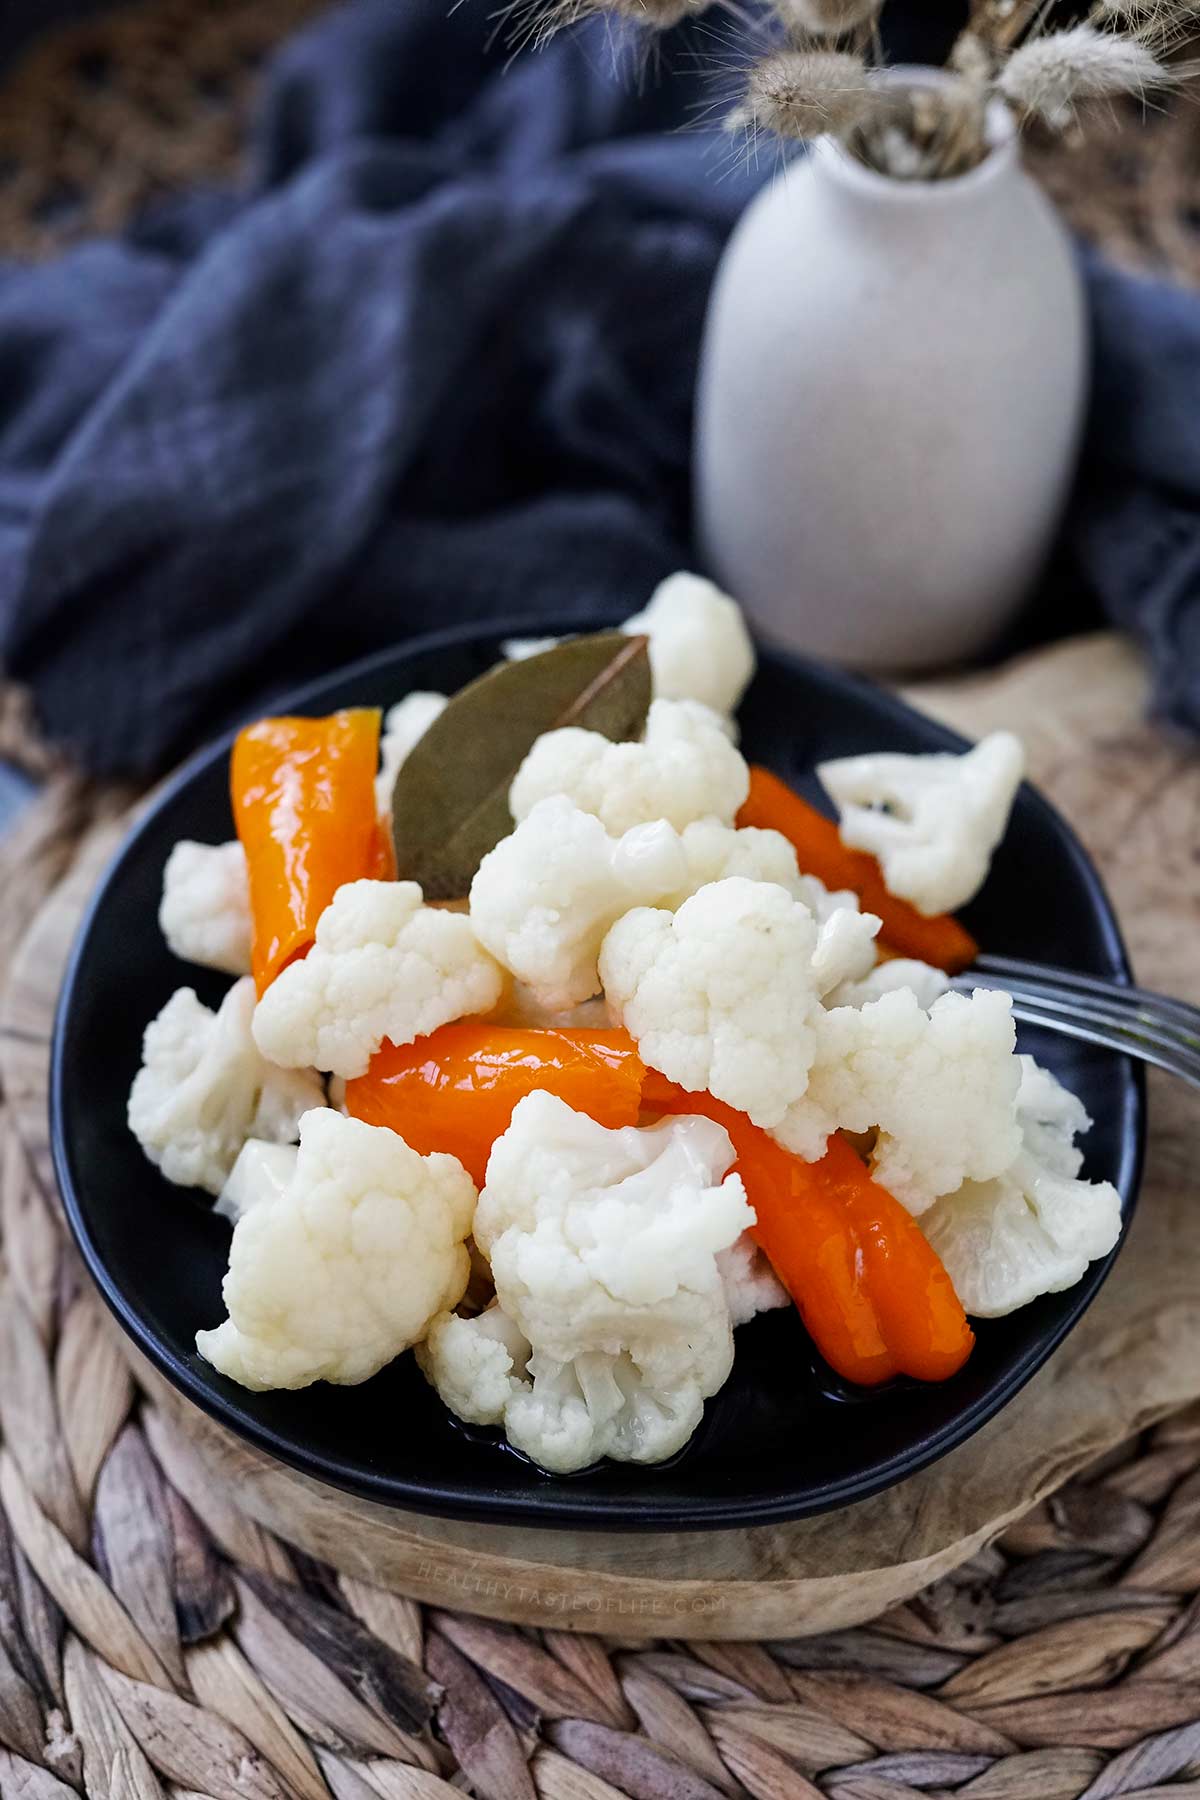 Fremented cauliflower with sweet peppers on a plate.